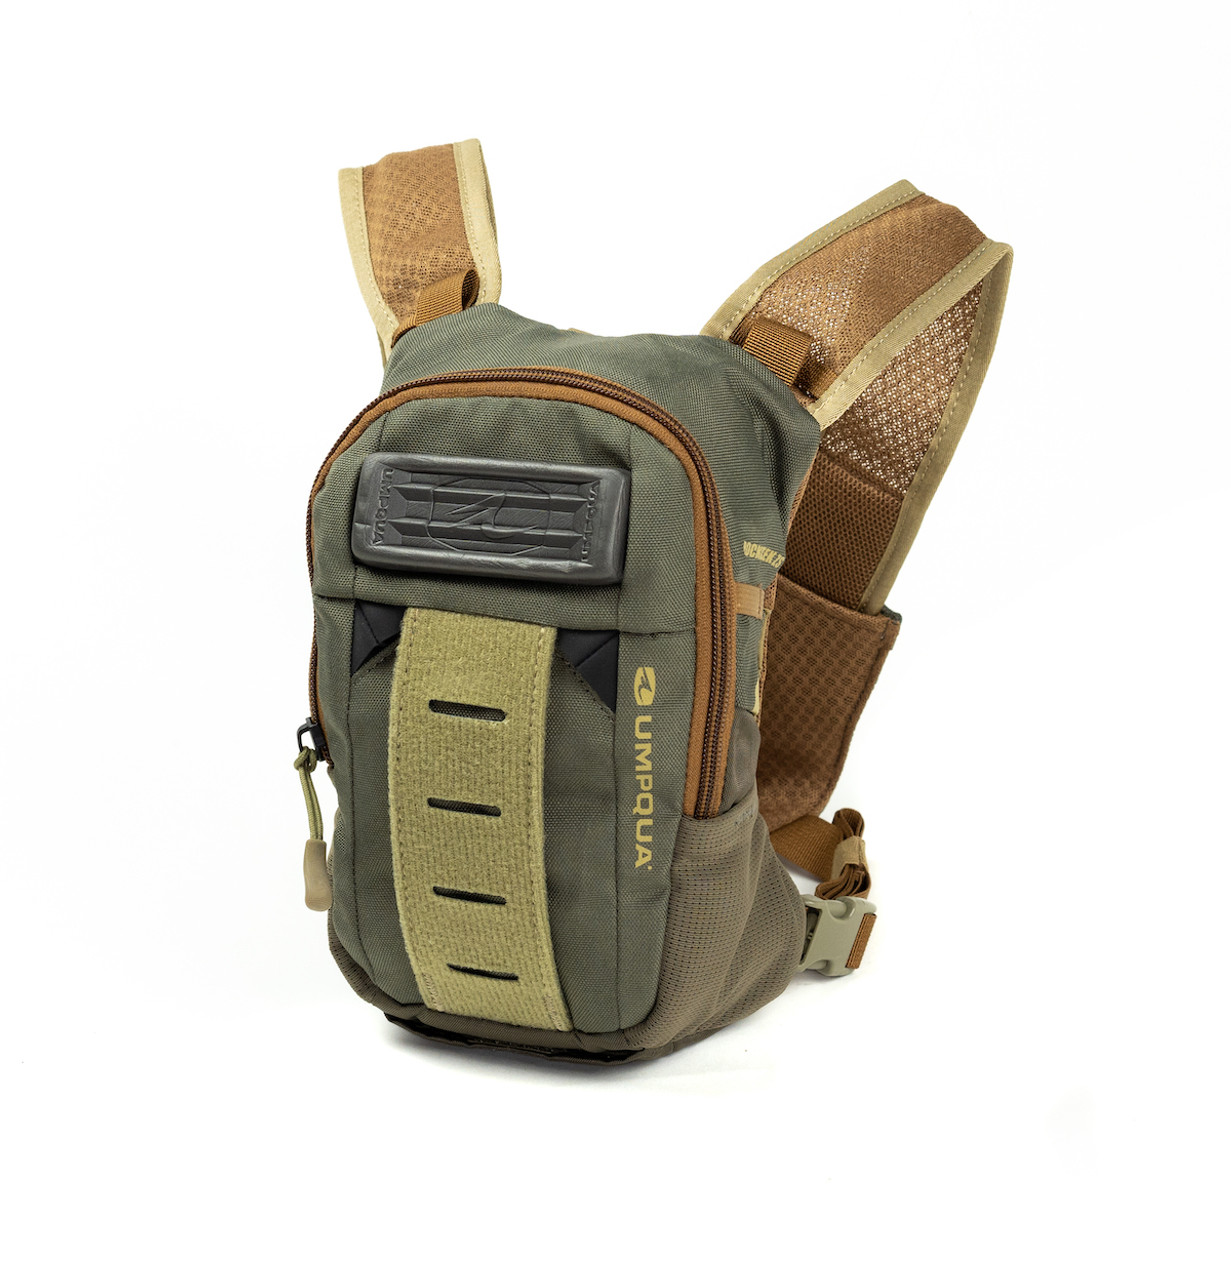 Rock Creek Chest Pack ZS2- Fly Fishing Chest Pack - Umpqua Feather 